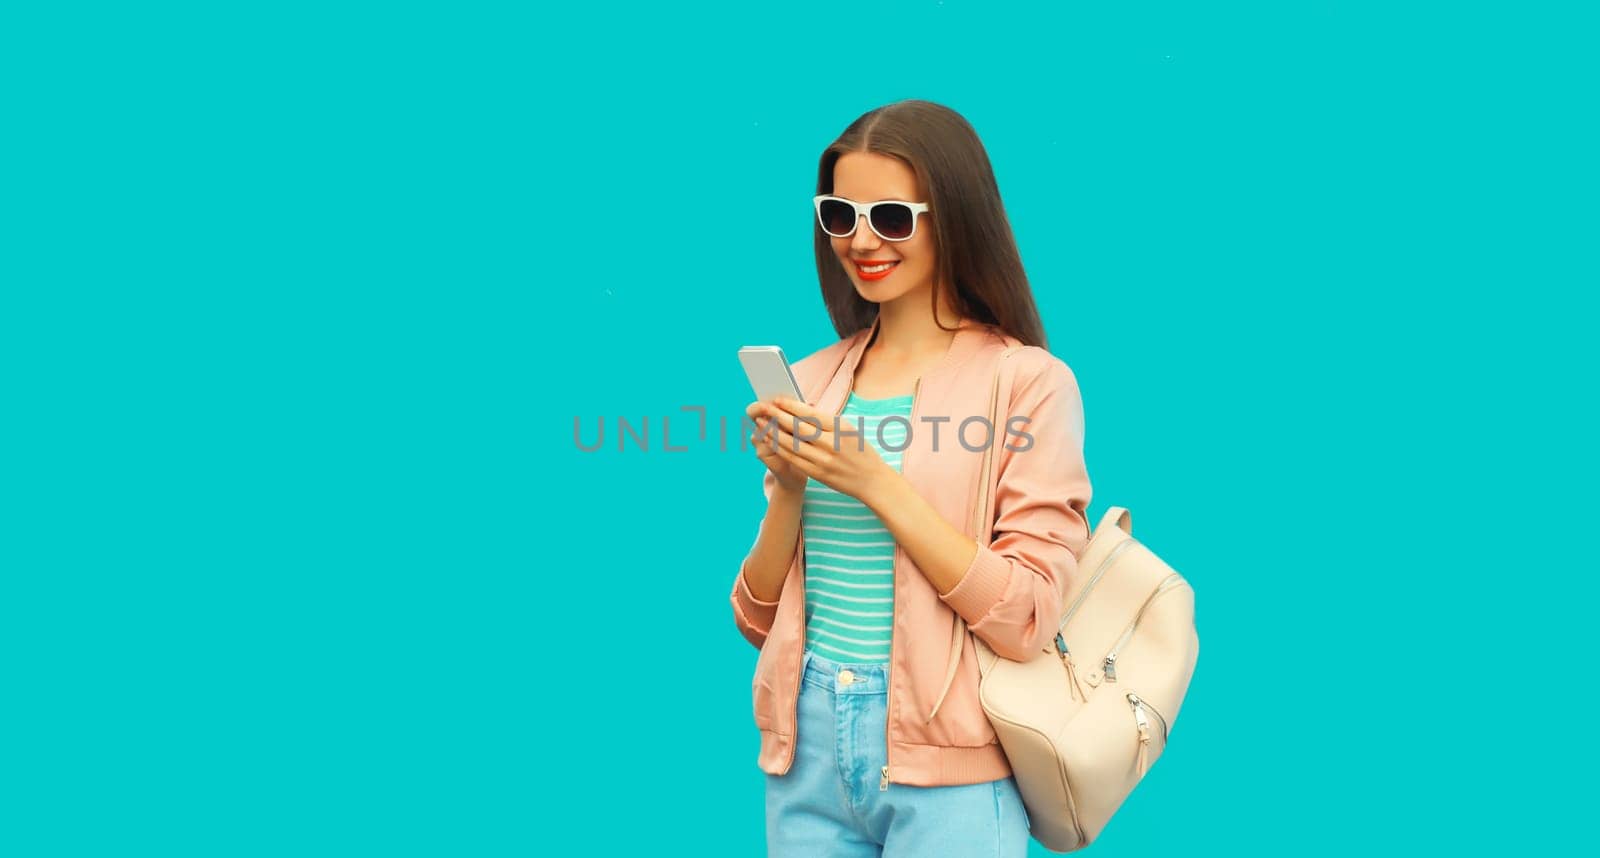 Portrait of smiling young woman with smartphone wearing backpack and sunglasses on blue background by Rohappy